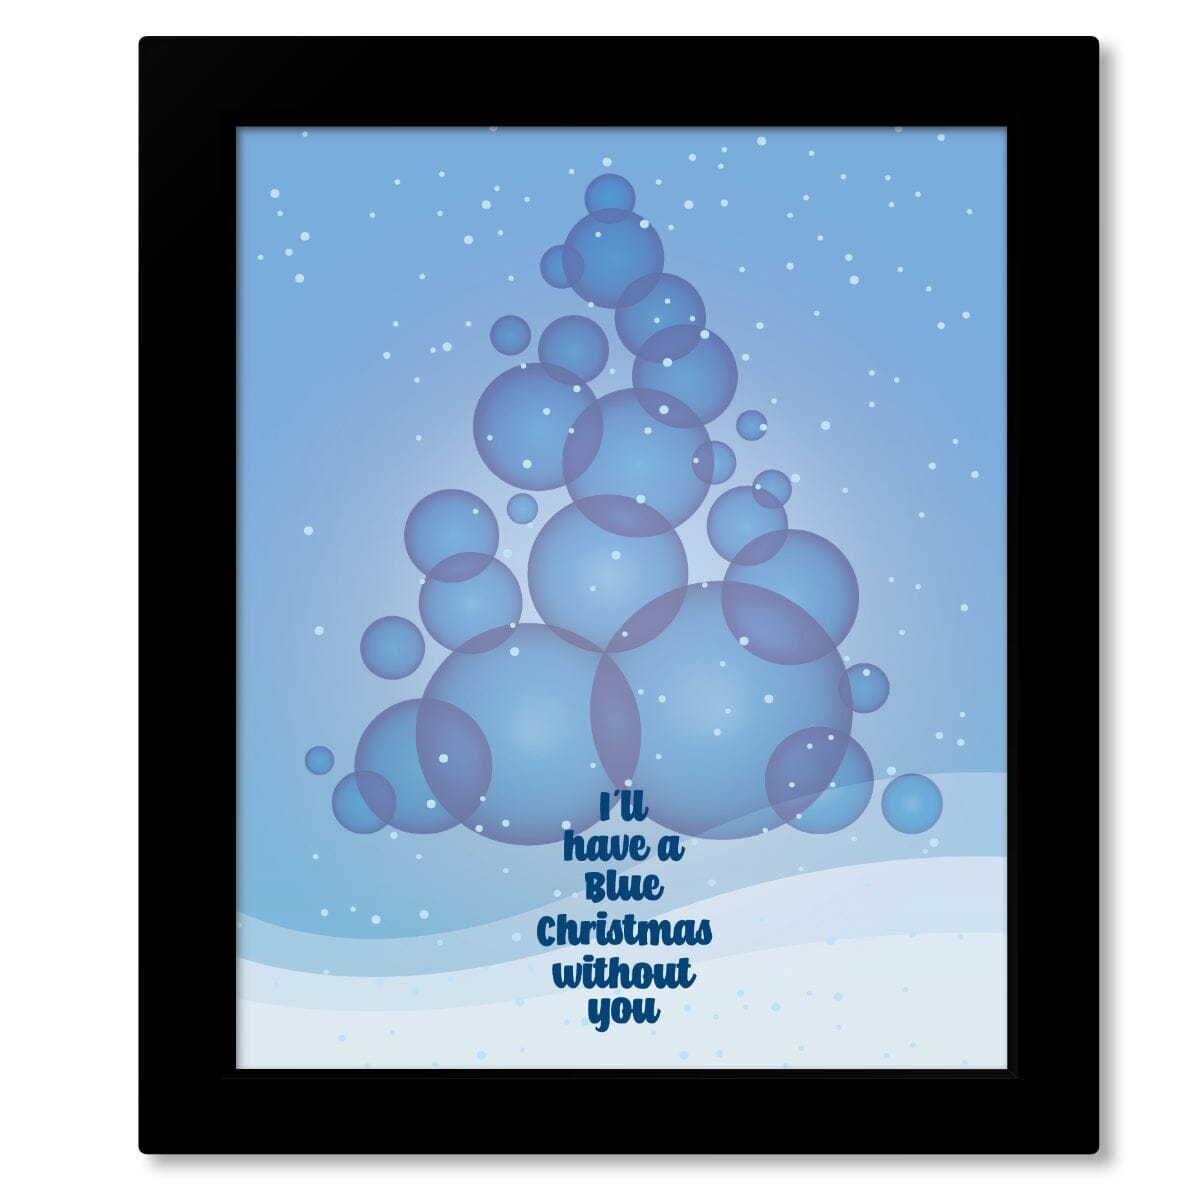 Blue Christmas by Elvis Presley - Lyric Inspired Art Print Song Lyrics Art Song Lyrics Art 8x10 Framed Print (without mat) 